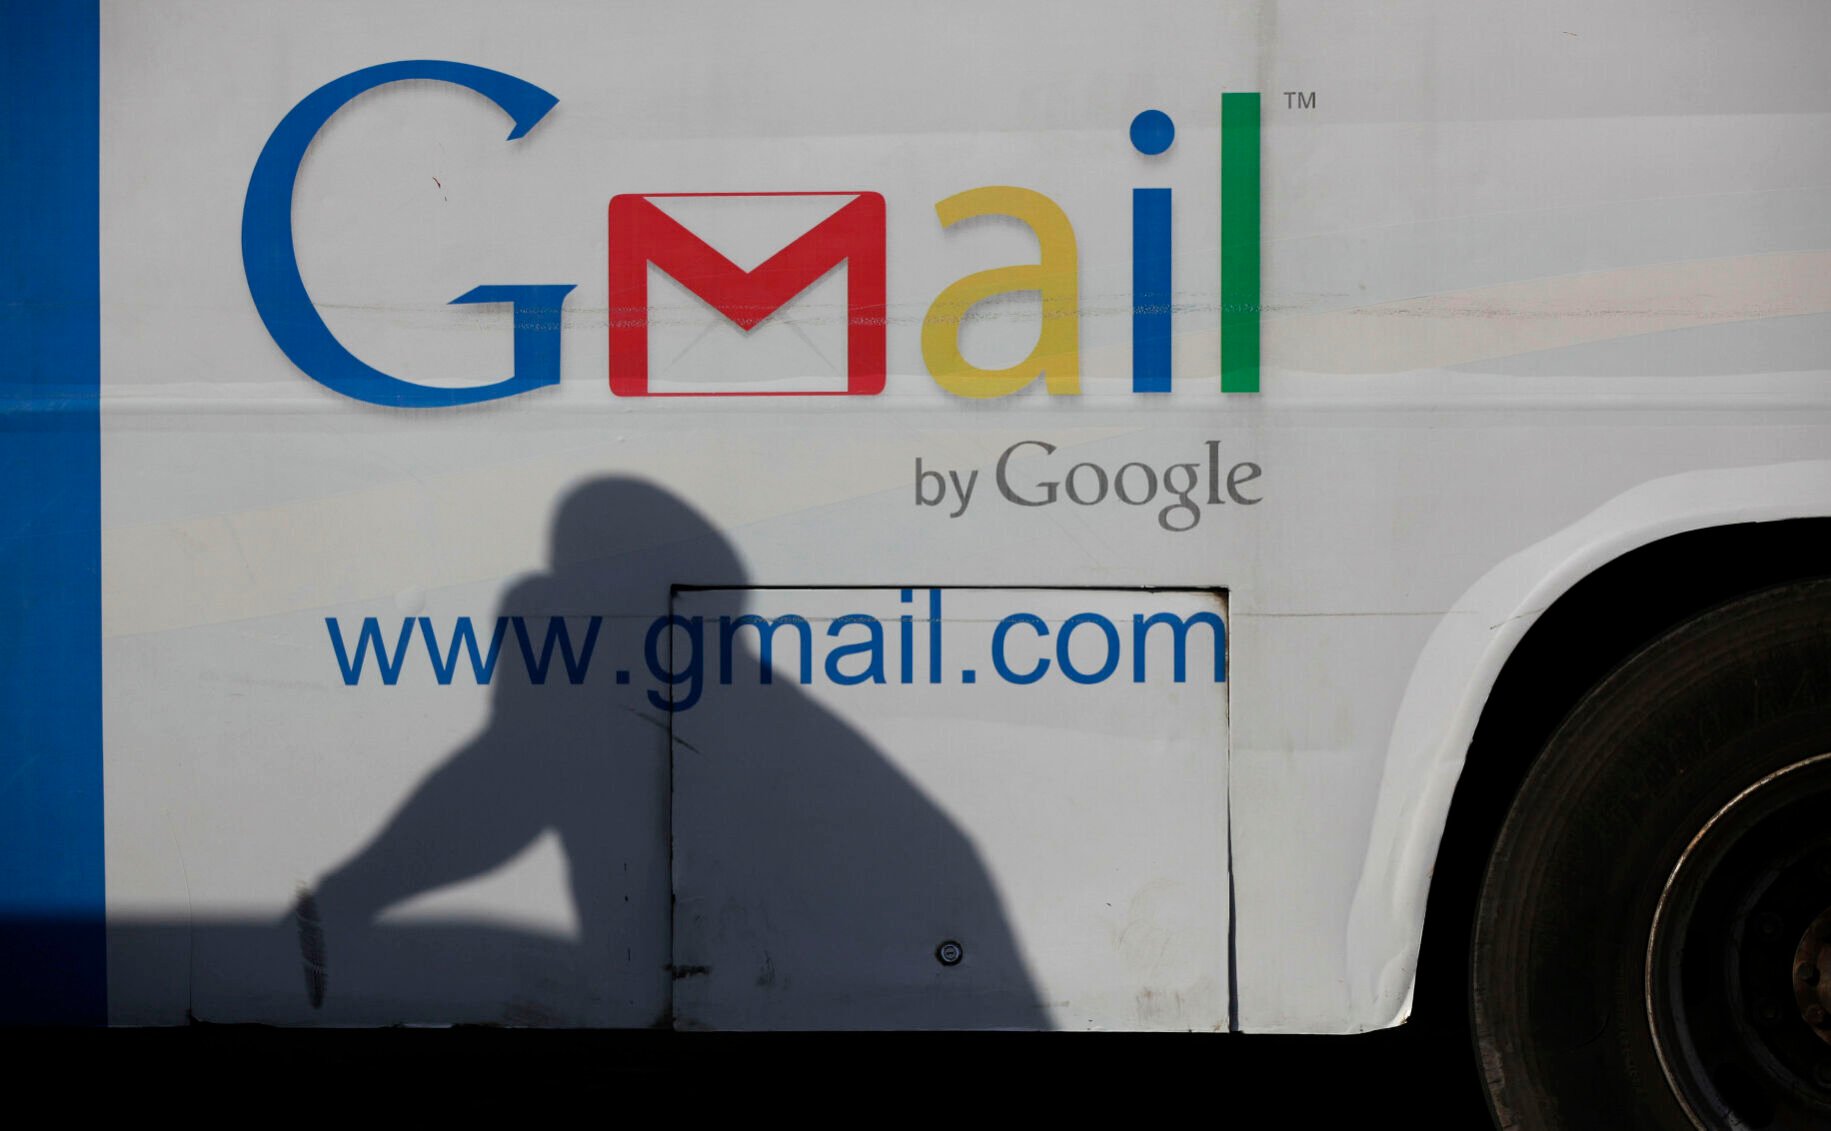 Gmail revolutionized email 20 years ago. People thought it was Google’s April Fool’s Day joke